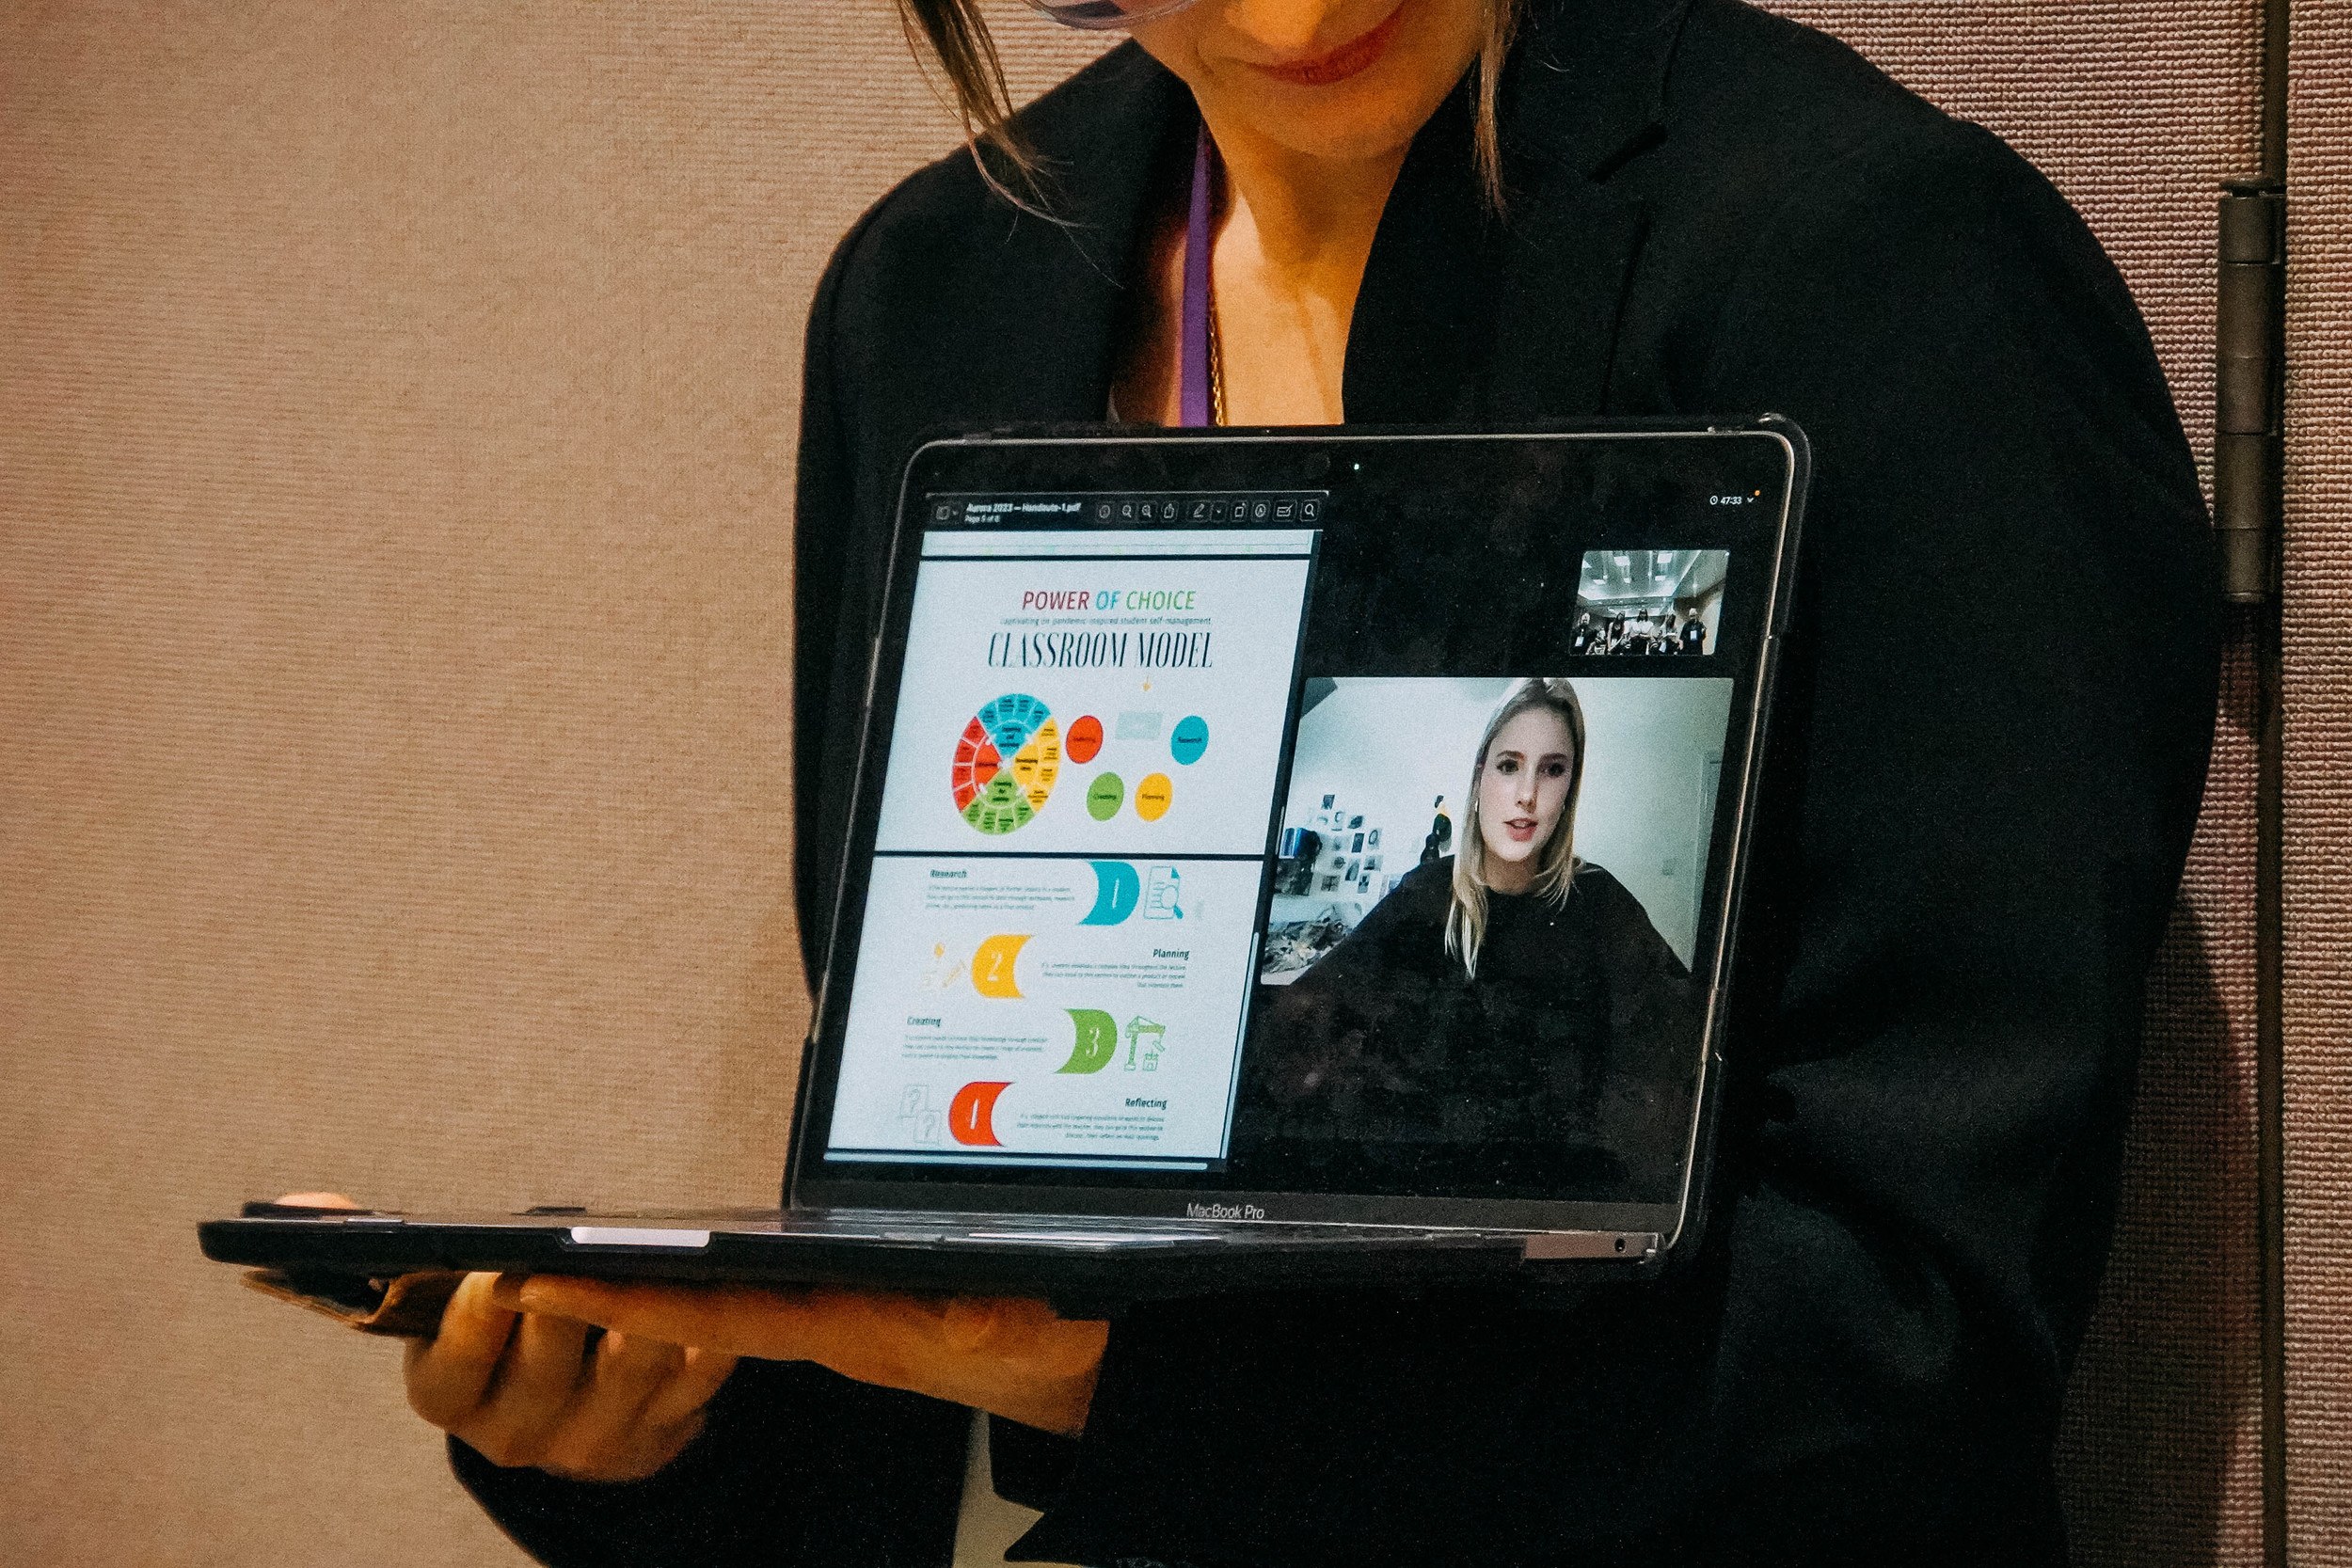 Presenter holding up a laptop, on which you can see a student talking and sharing a graphic.